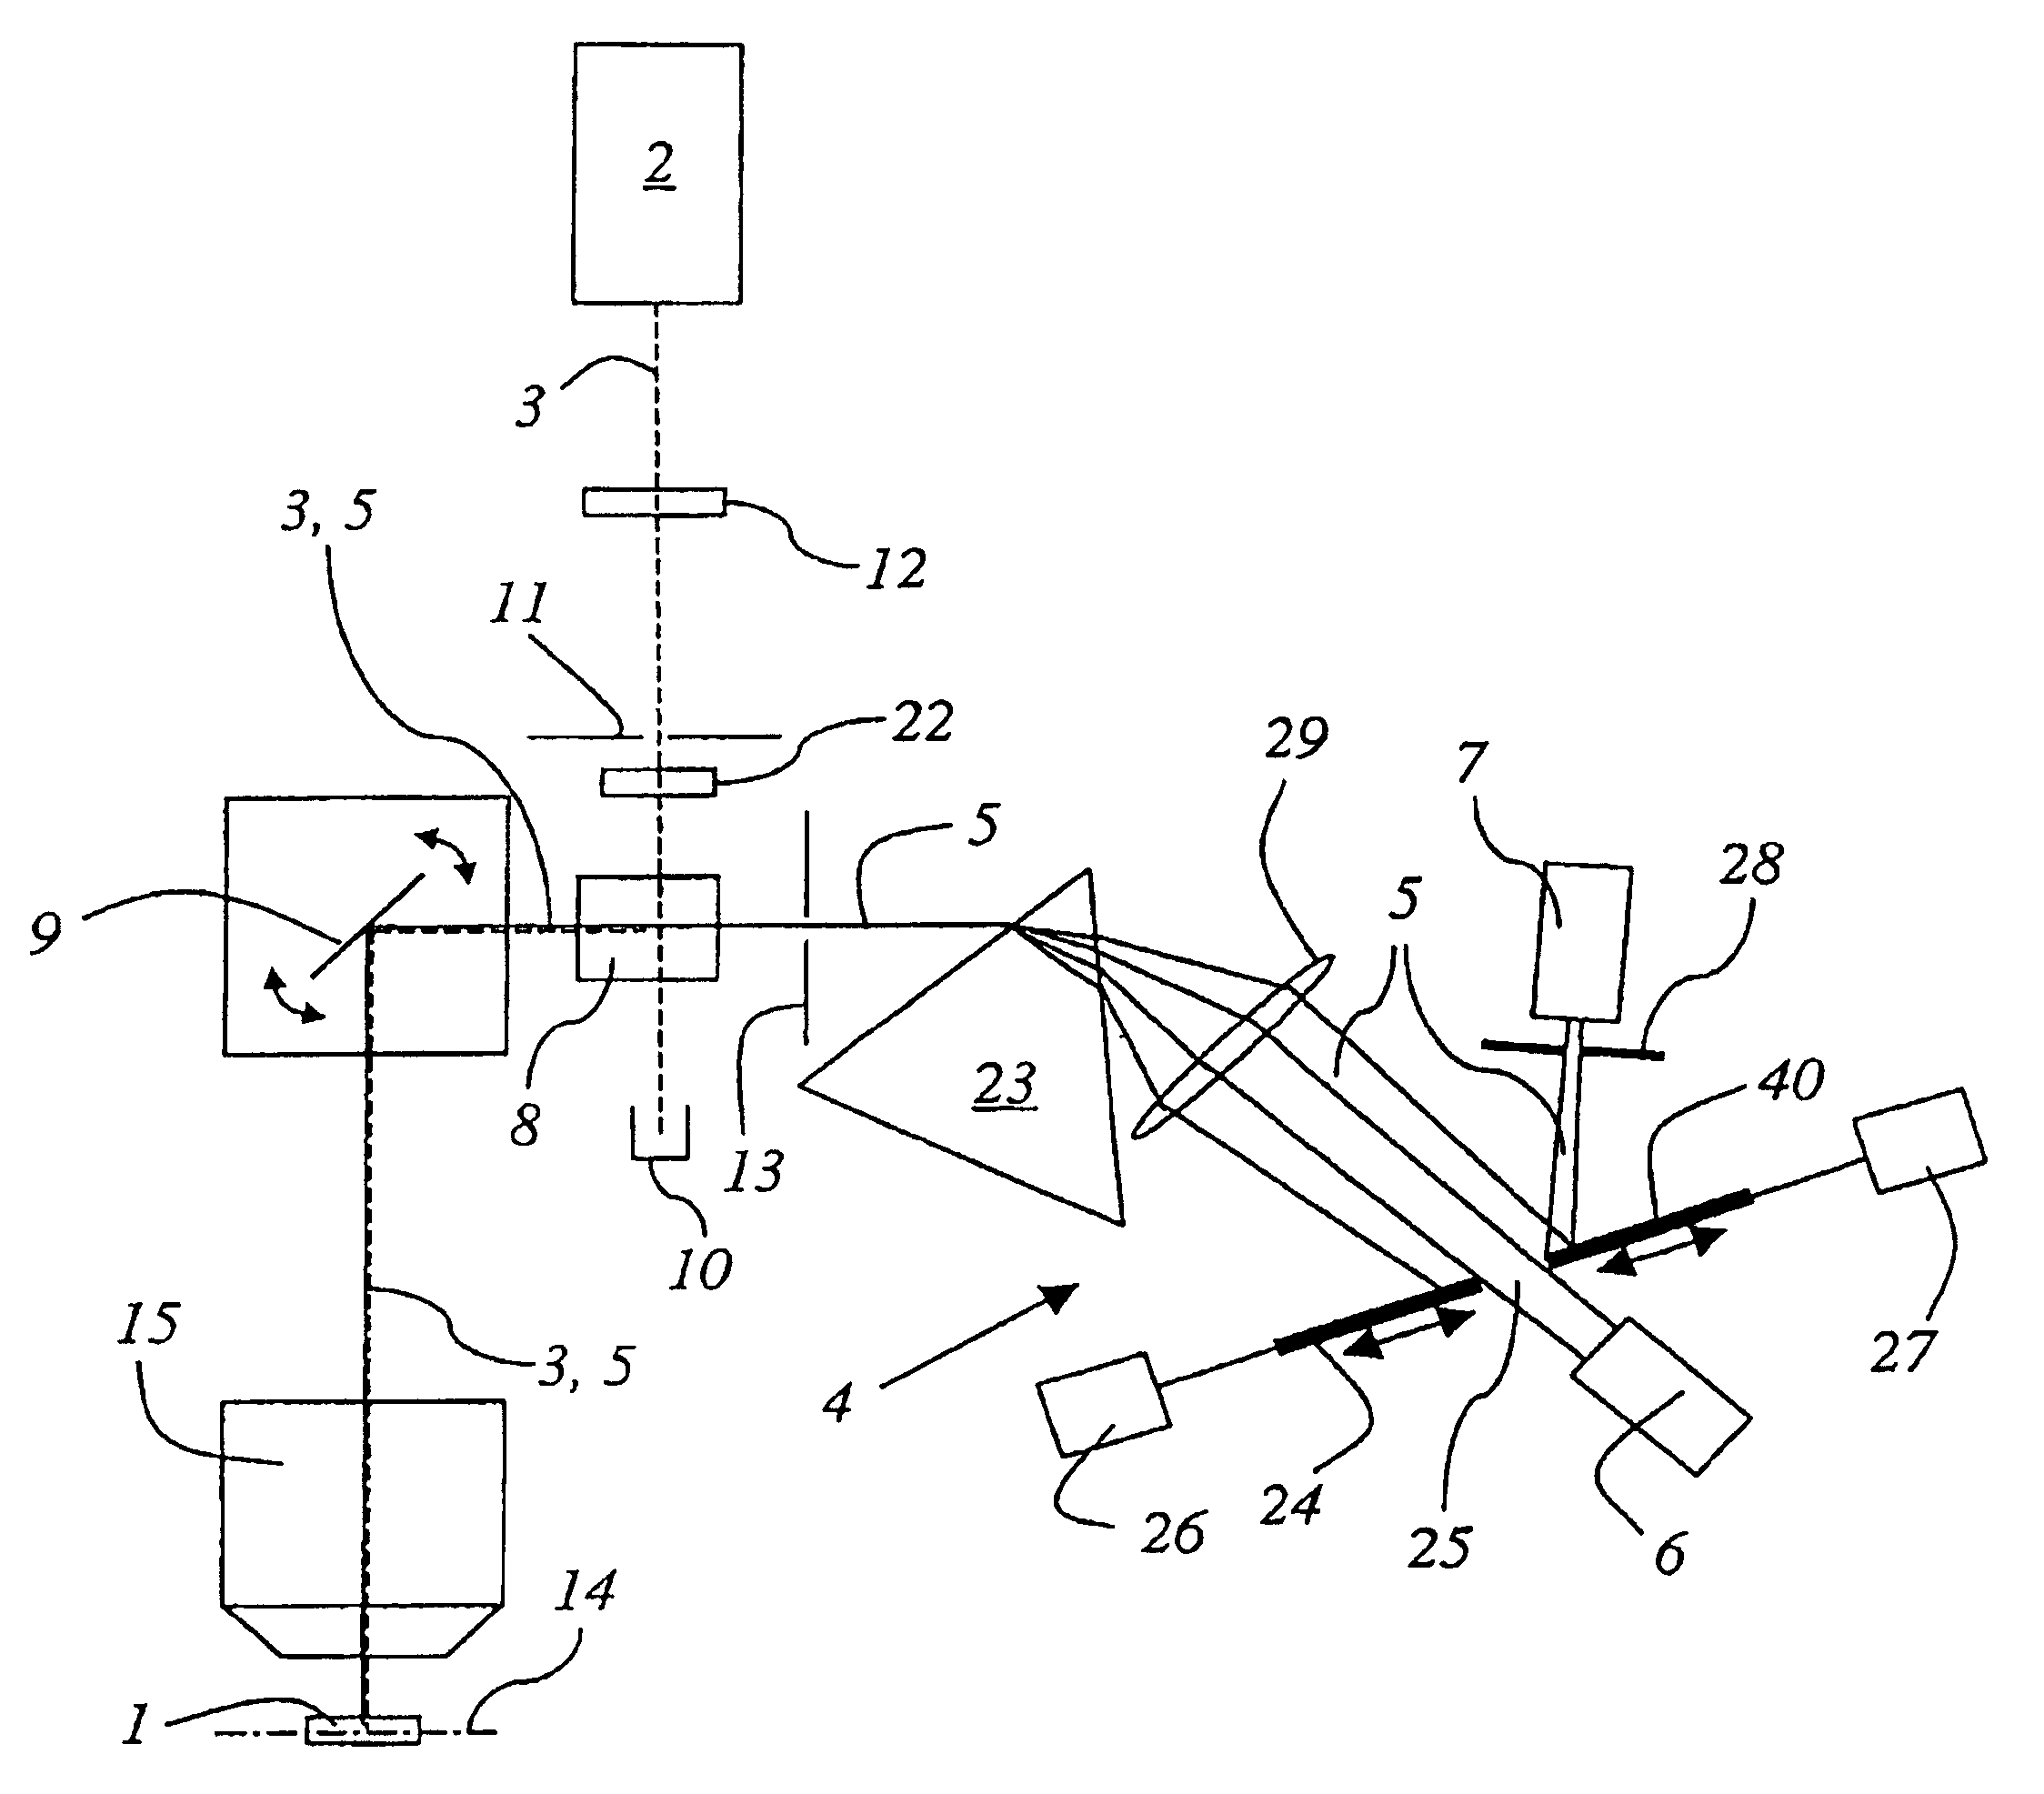 Scanning microscope comprising a confocal slit scanner for imaging an object